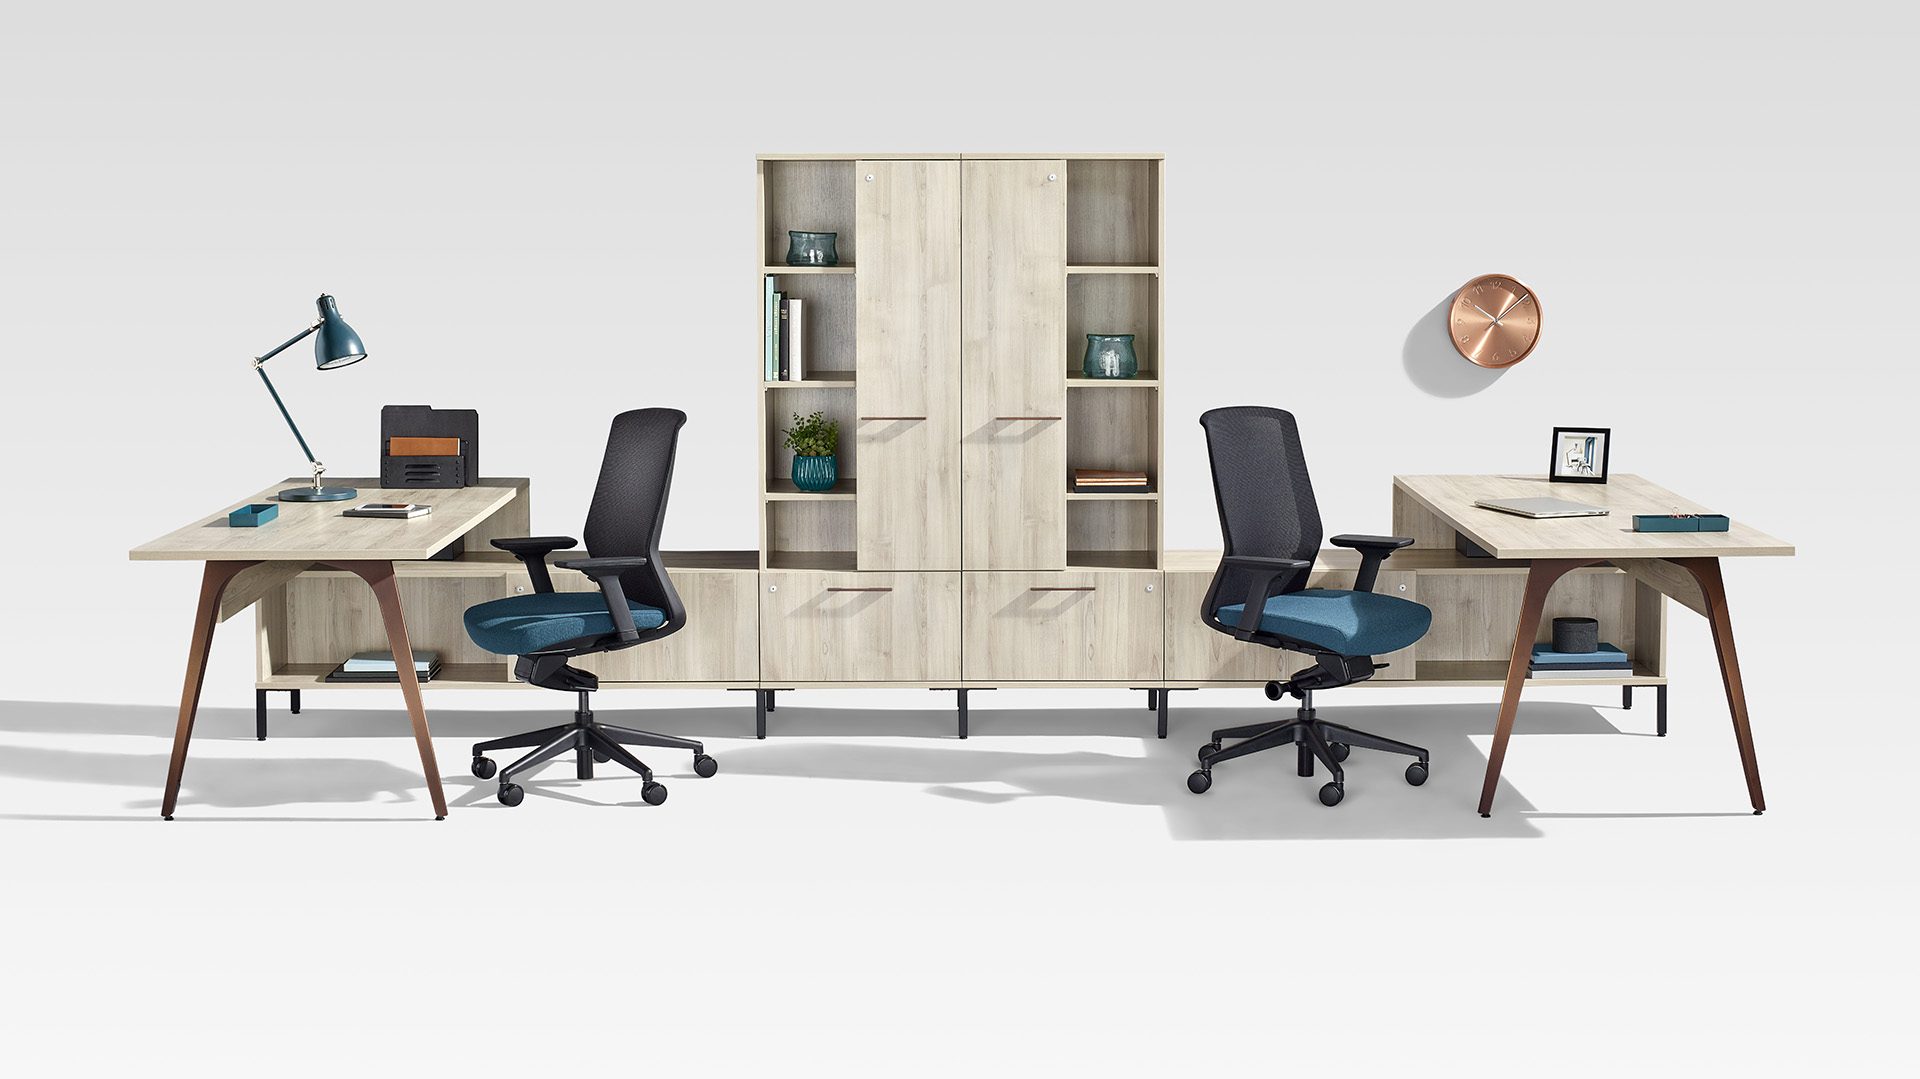 <h1>Choosing the Right Laminate for Your Office Furniture</h1>